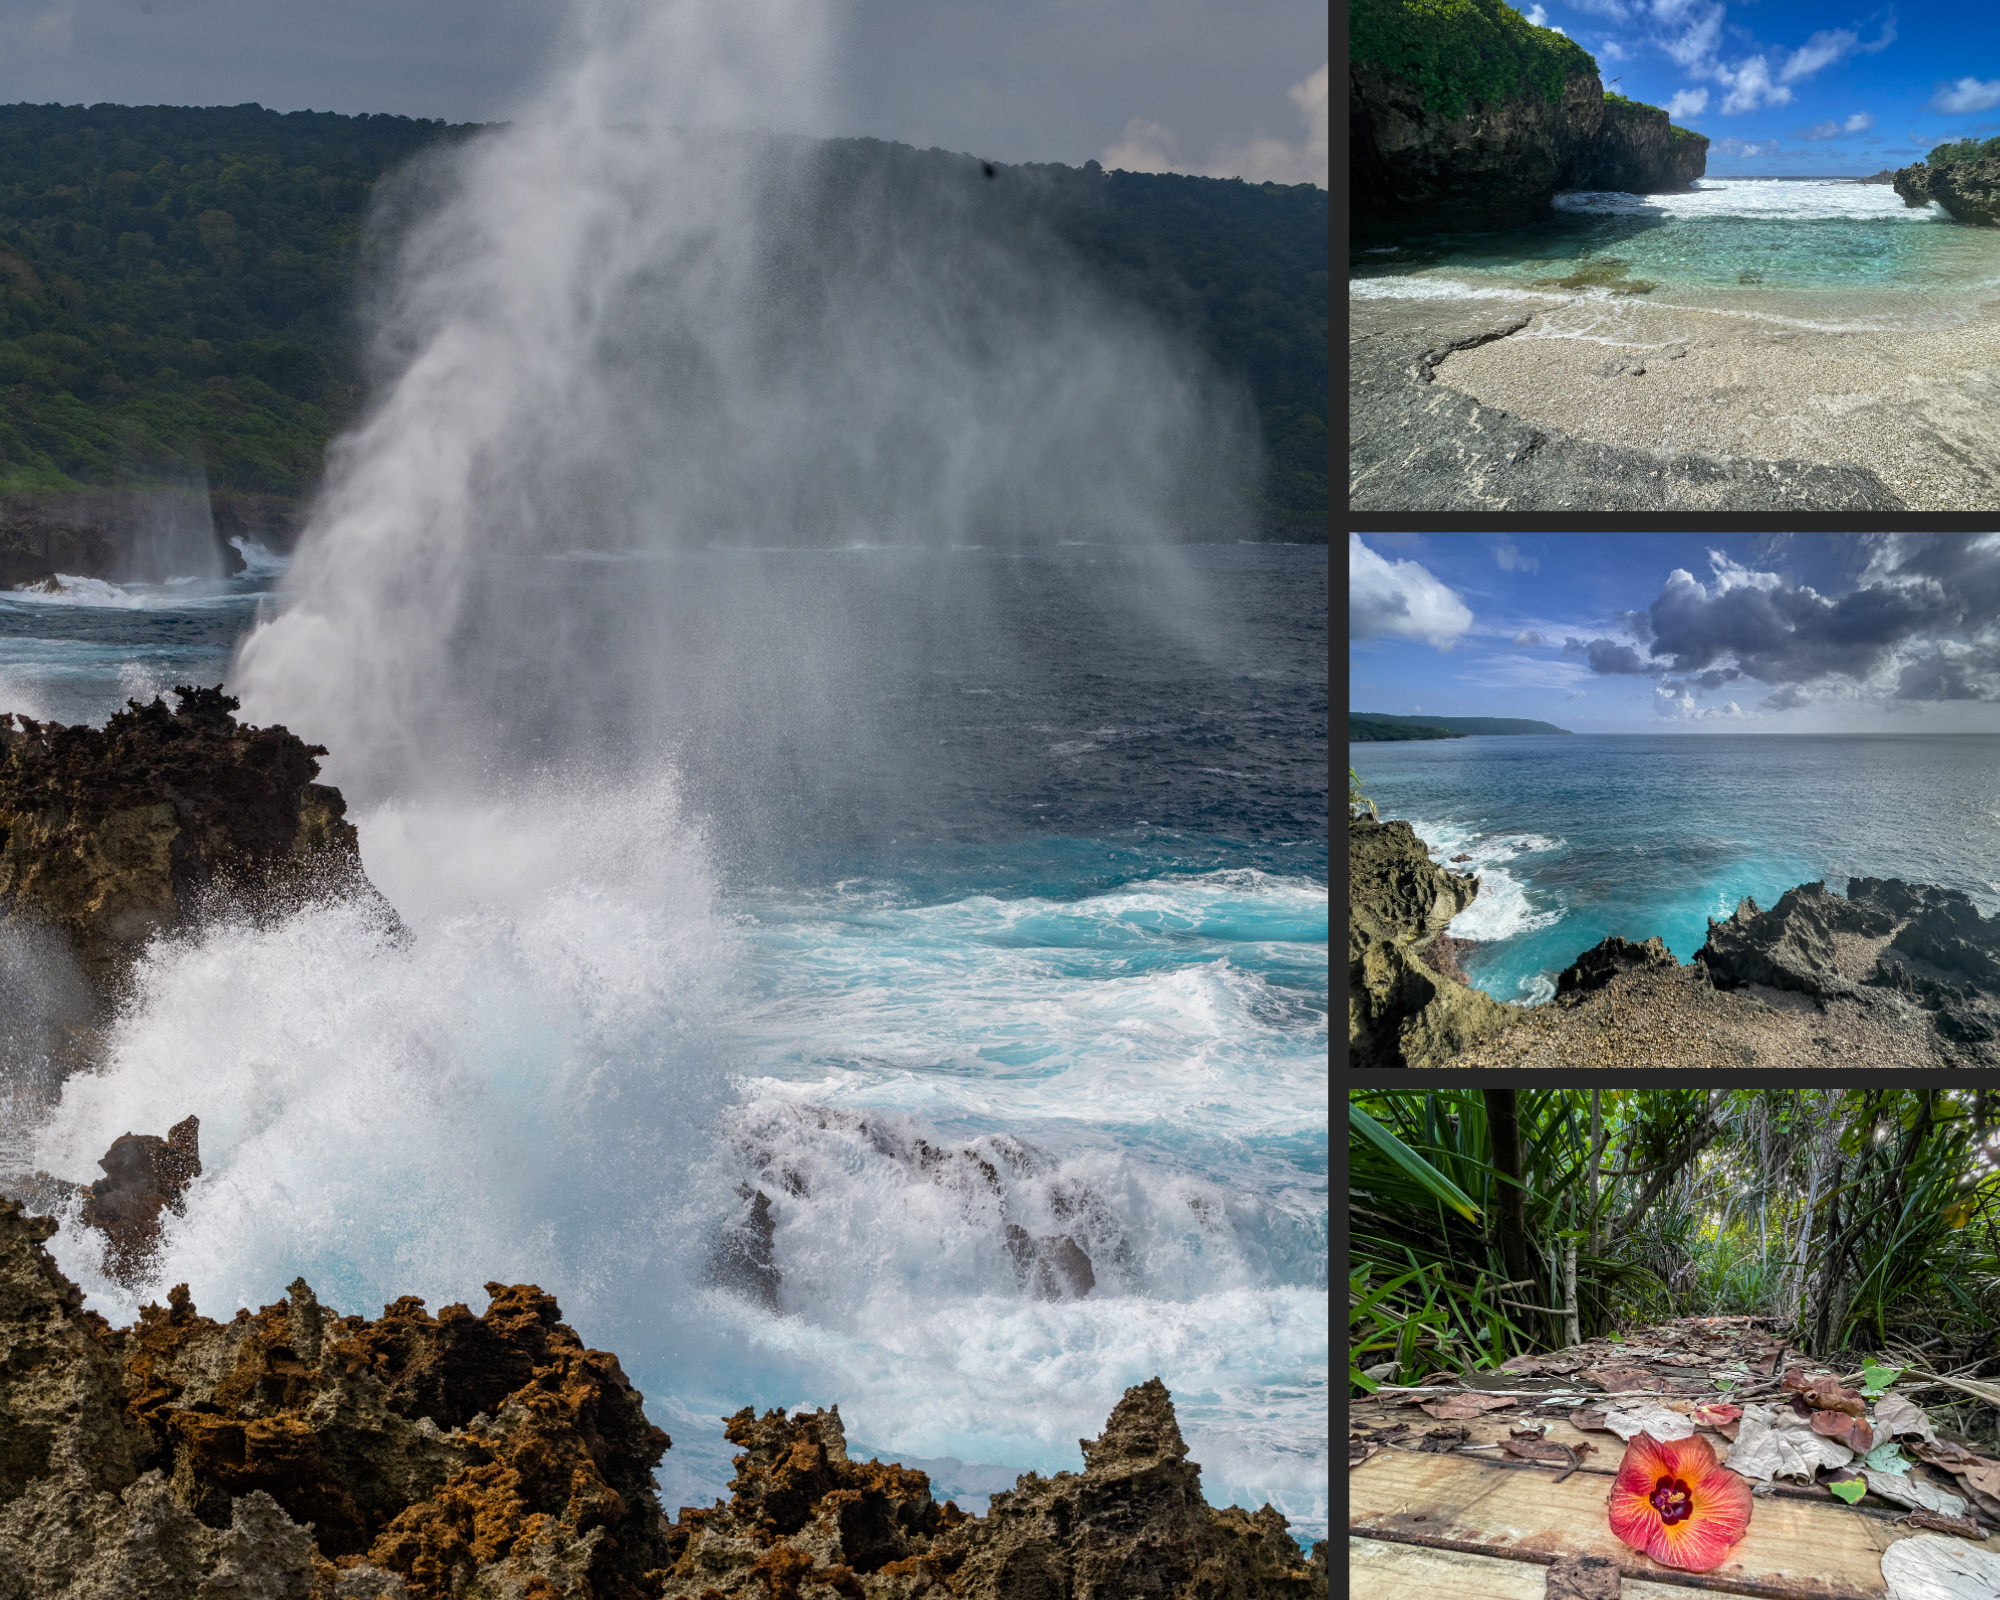 A photocollage of The Blowholes blowing, Lily beach, Martin Point and a pandanus grotto along a boardwalk